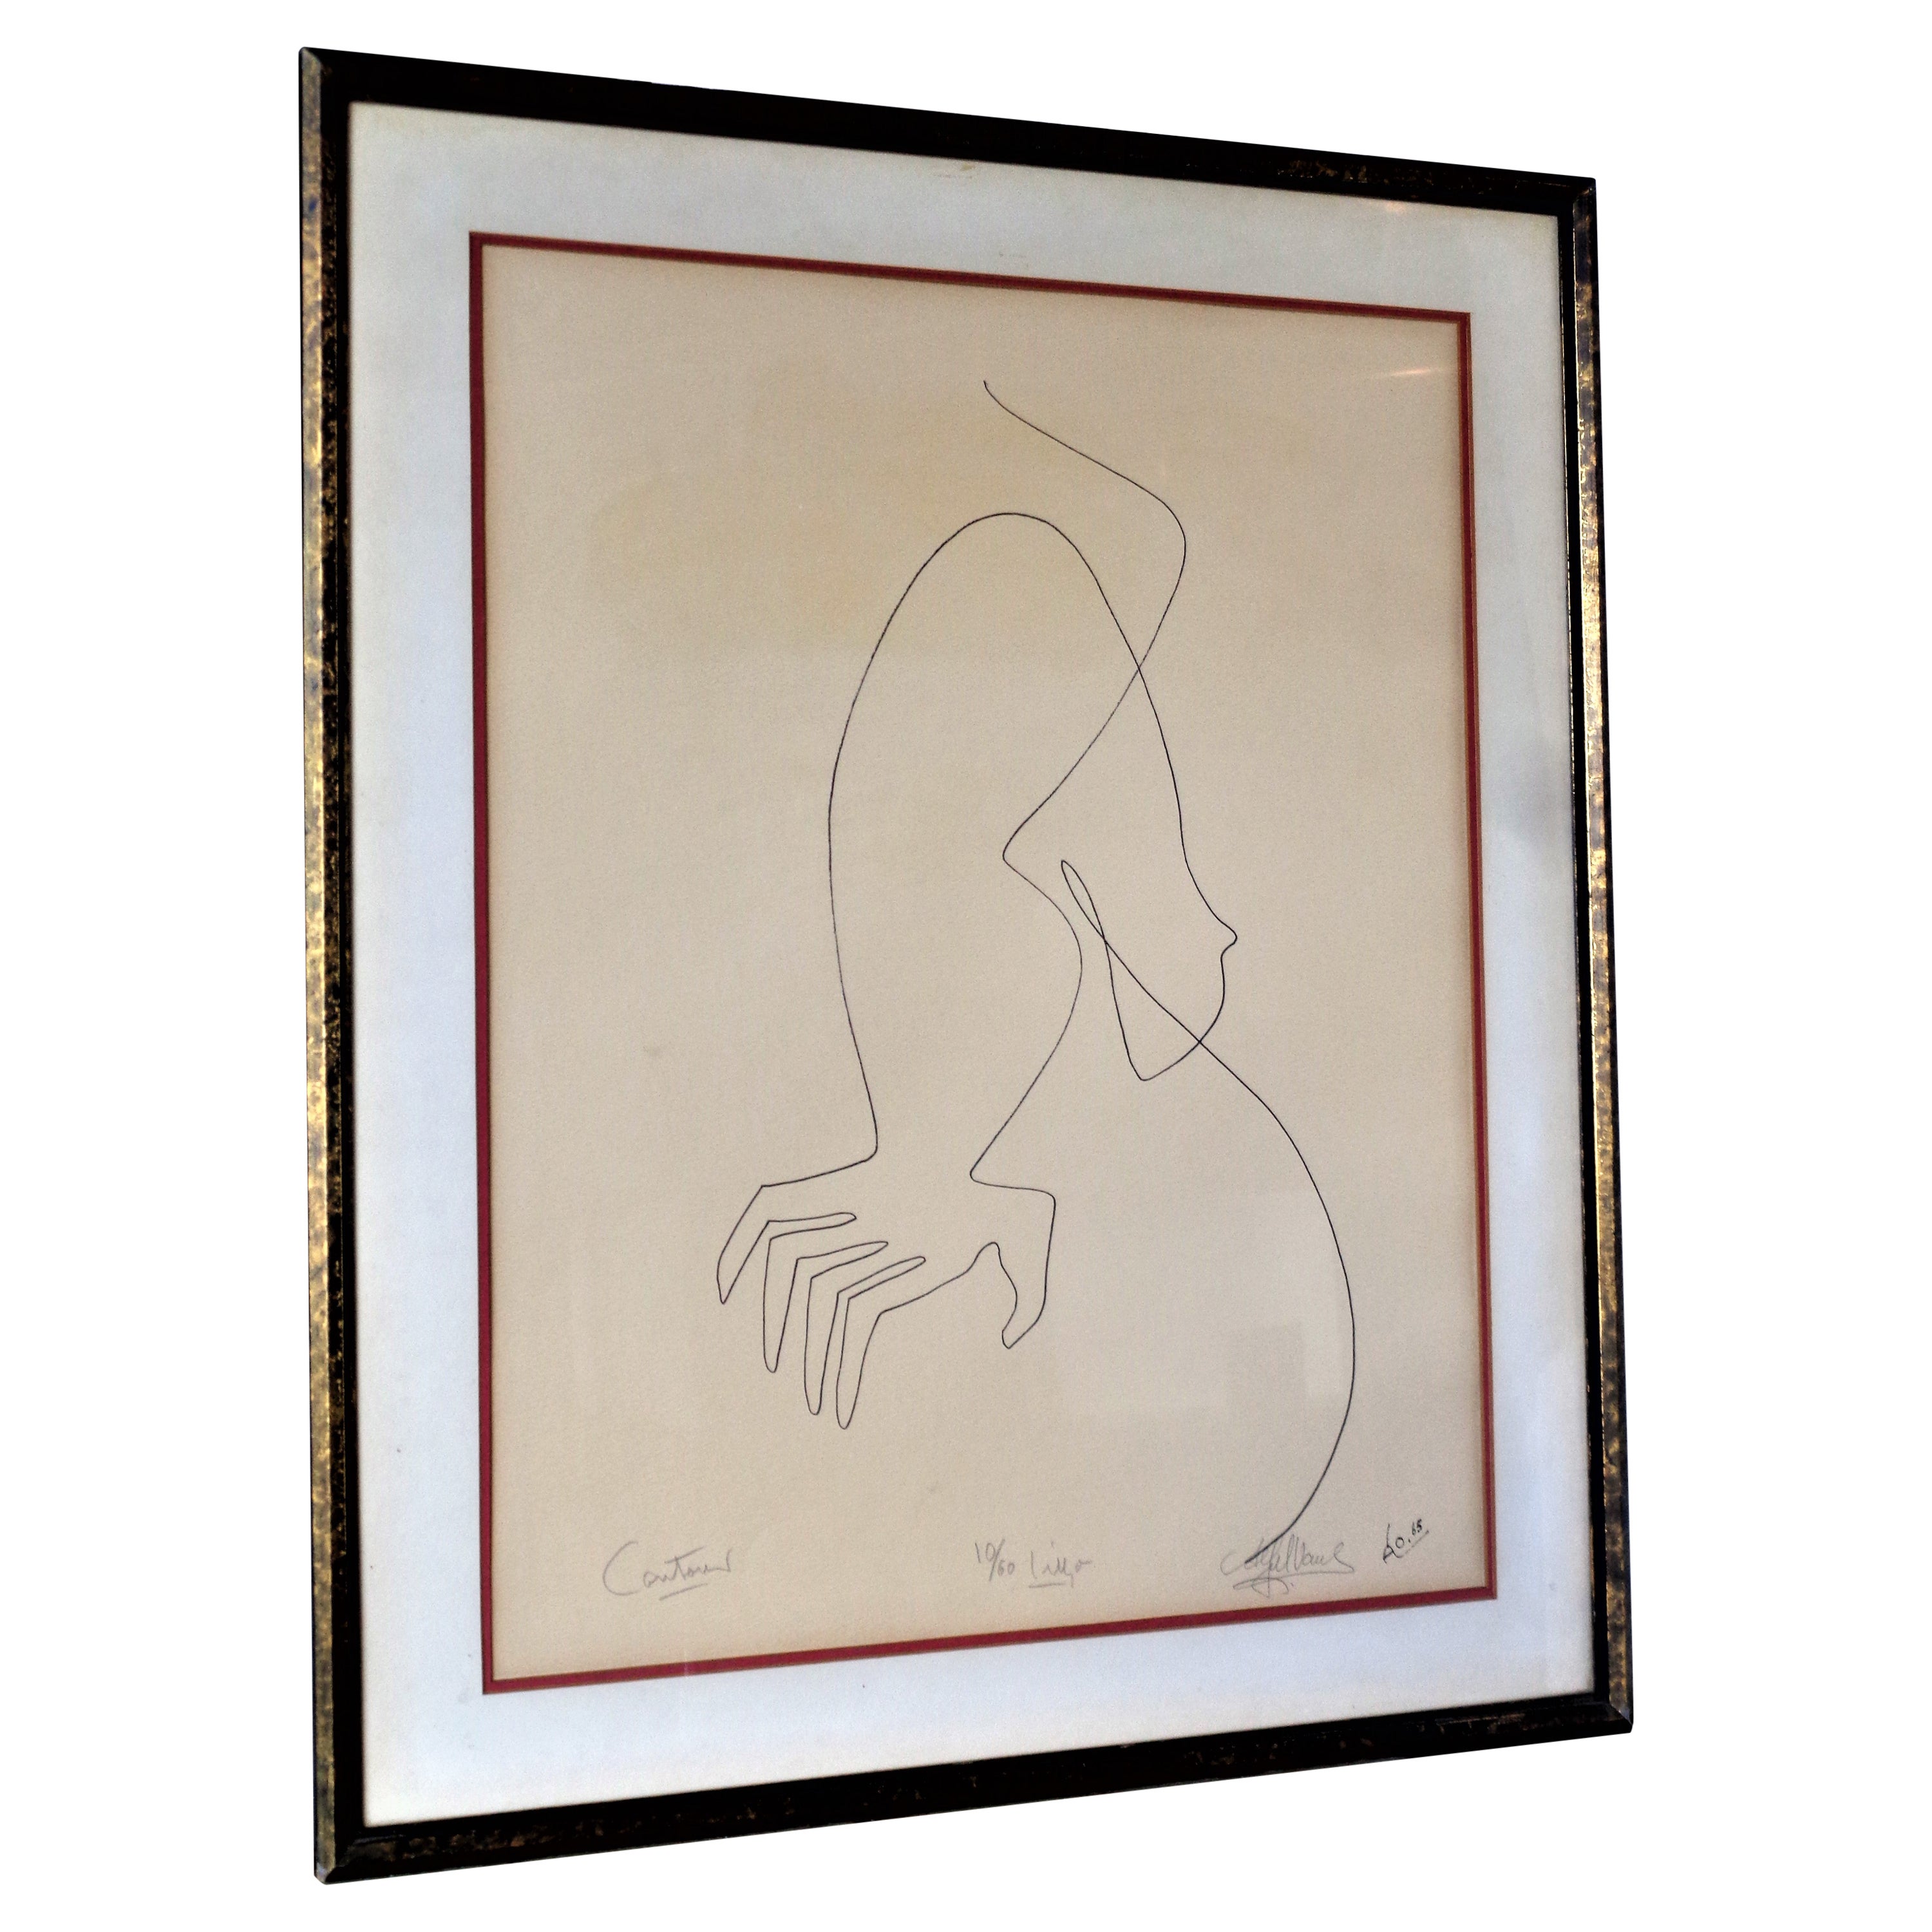 Lithograph "Contour" by Alfred Van Loen, 1965